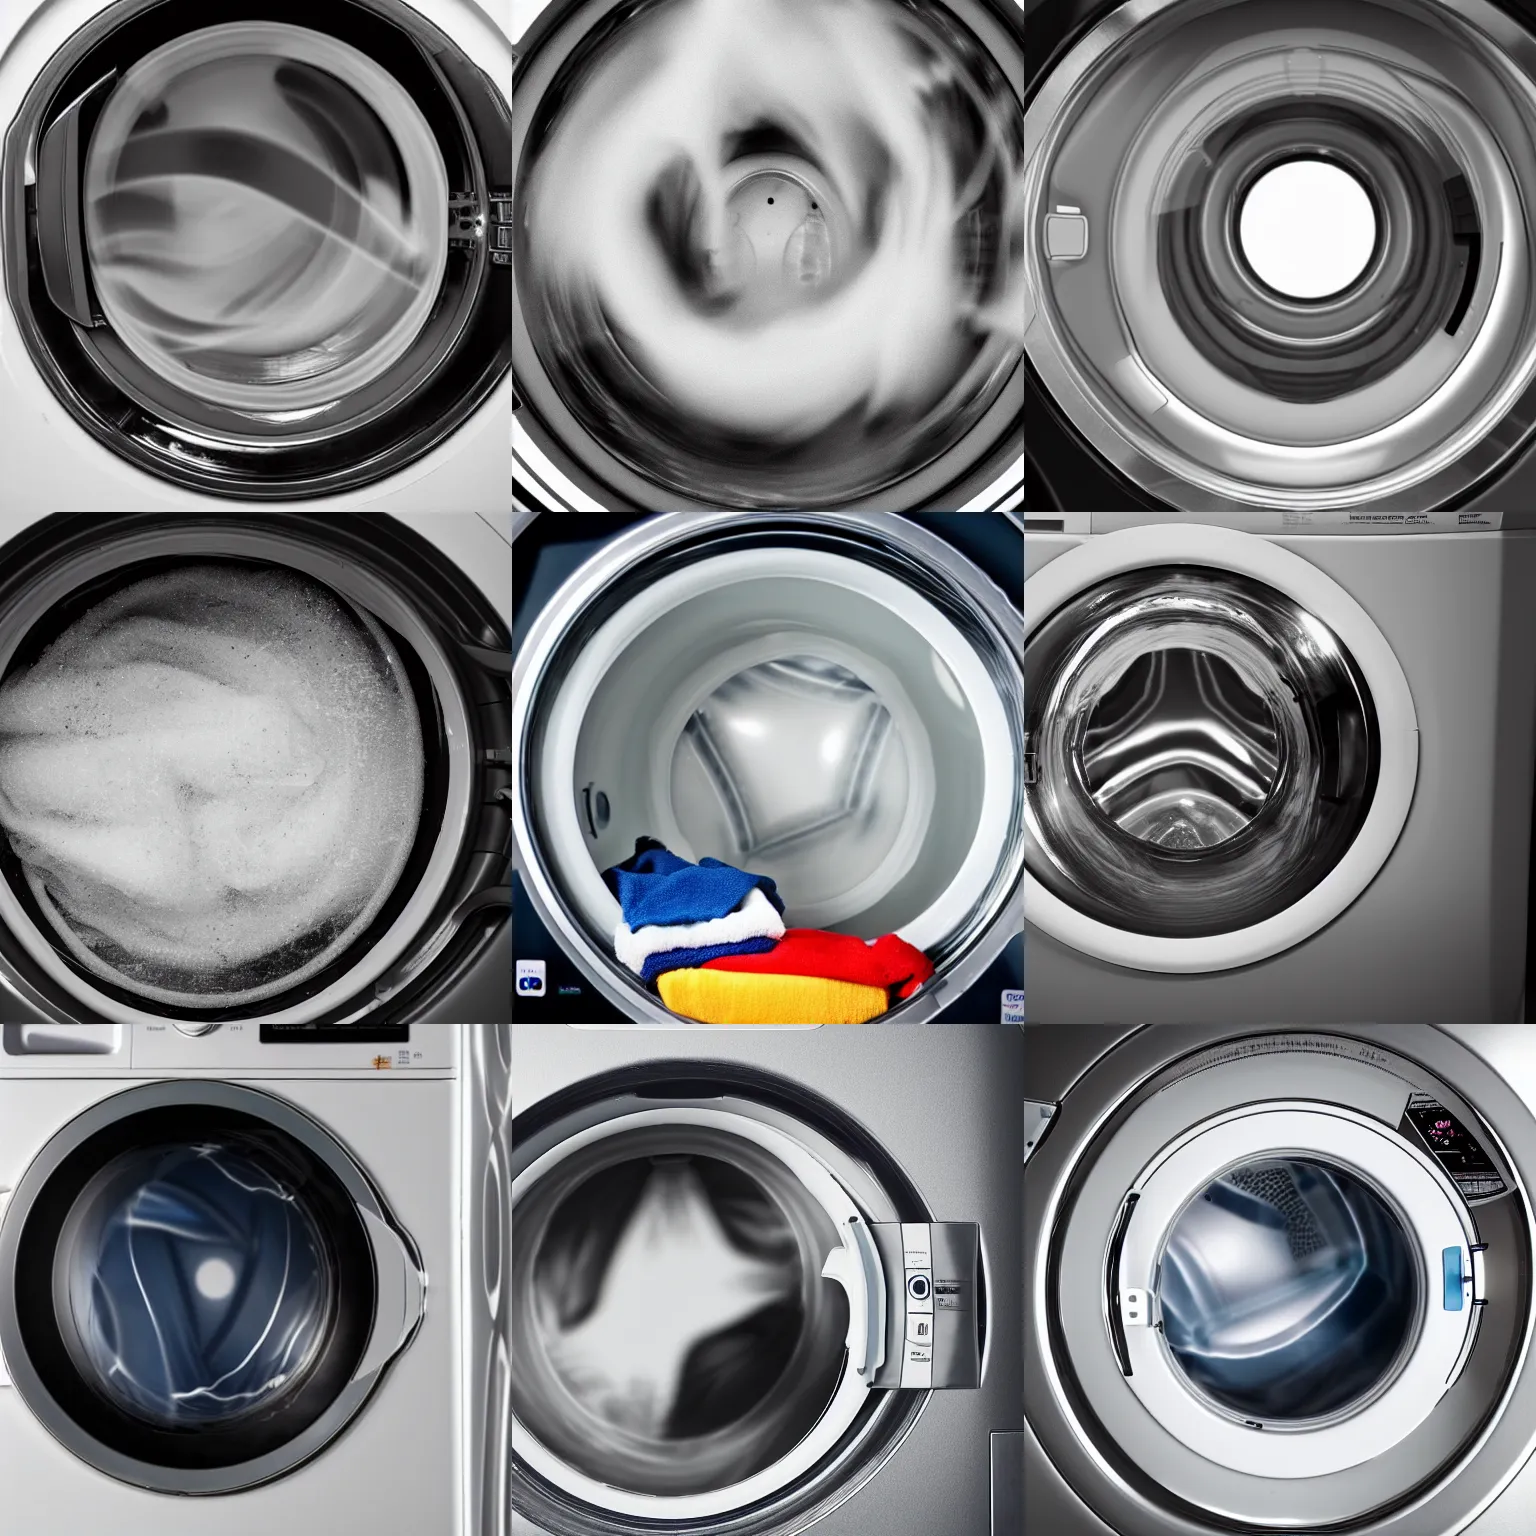 Prompt: A picture taken inside a washing machine